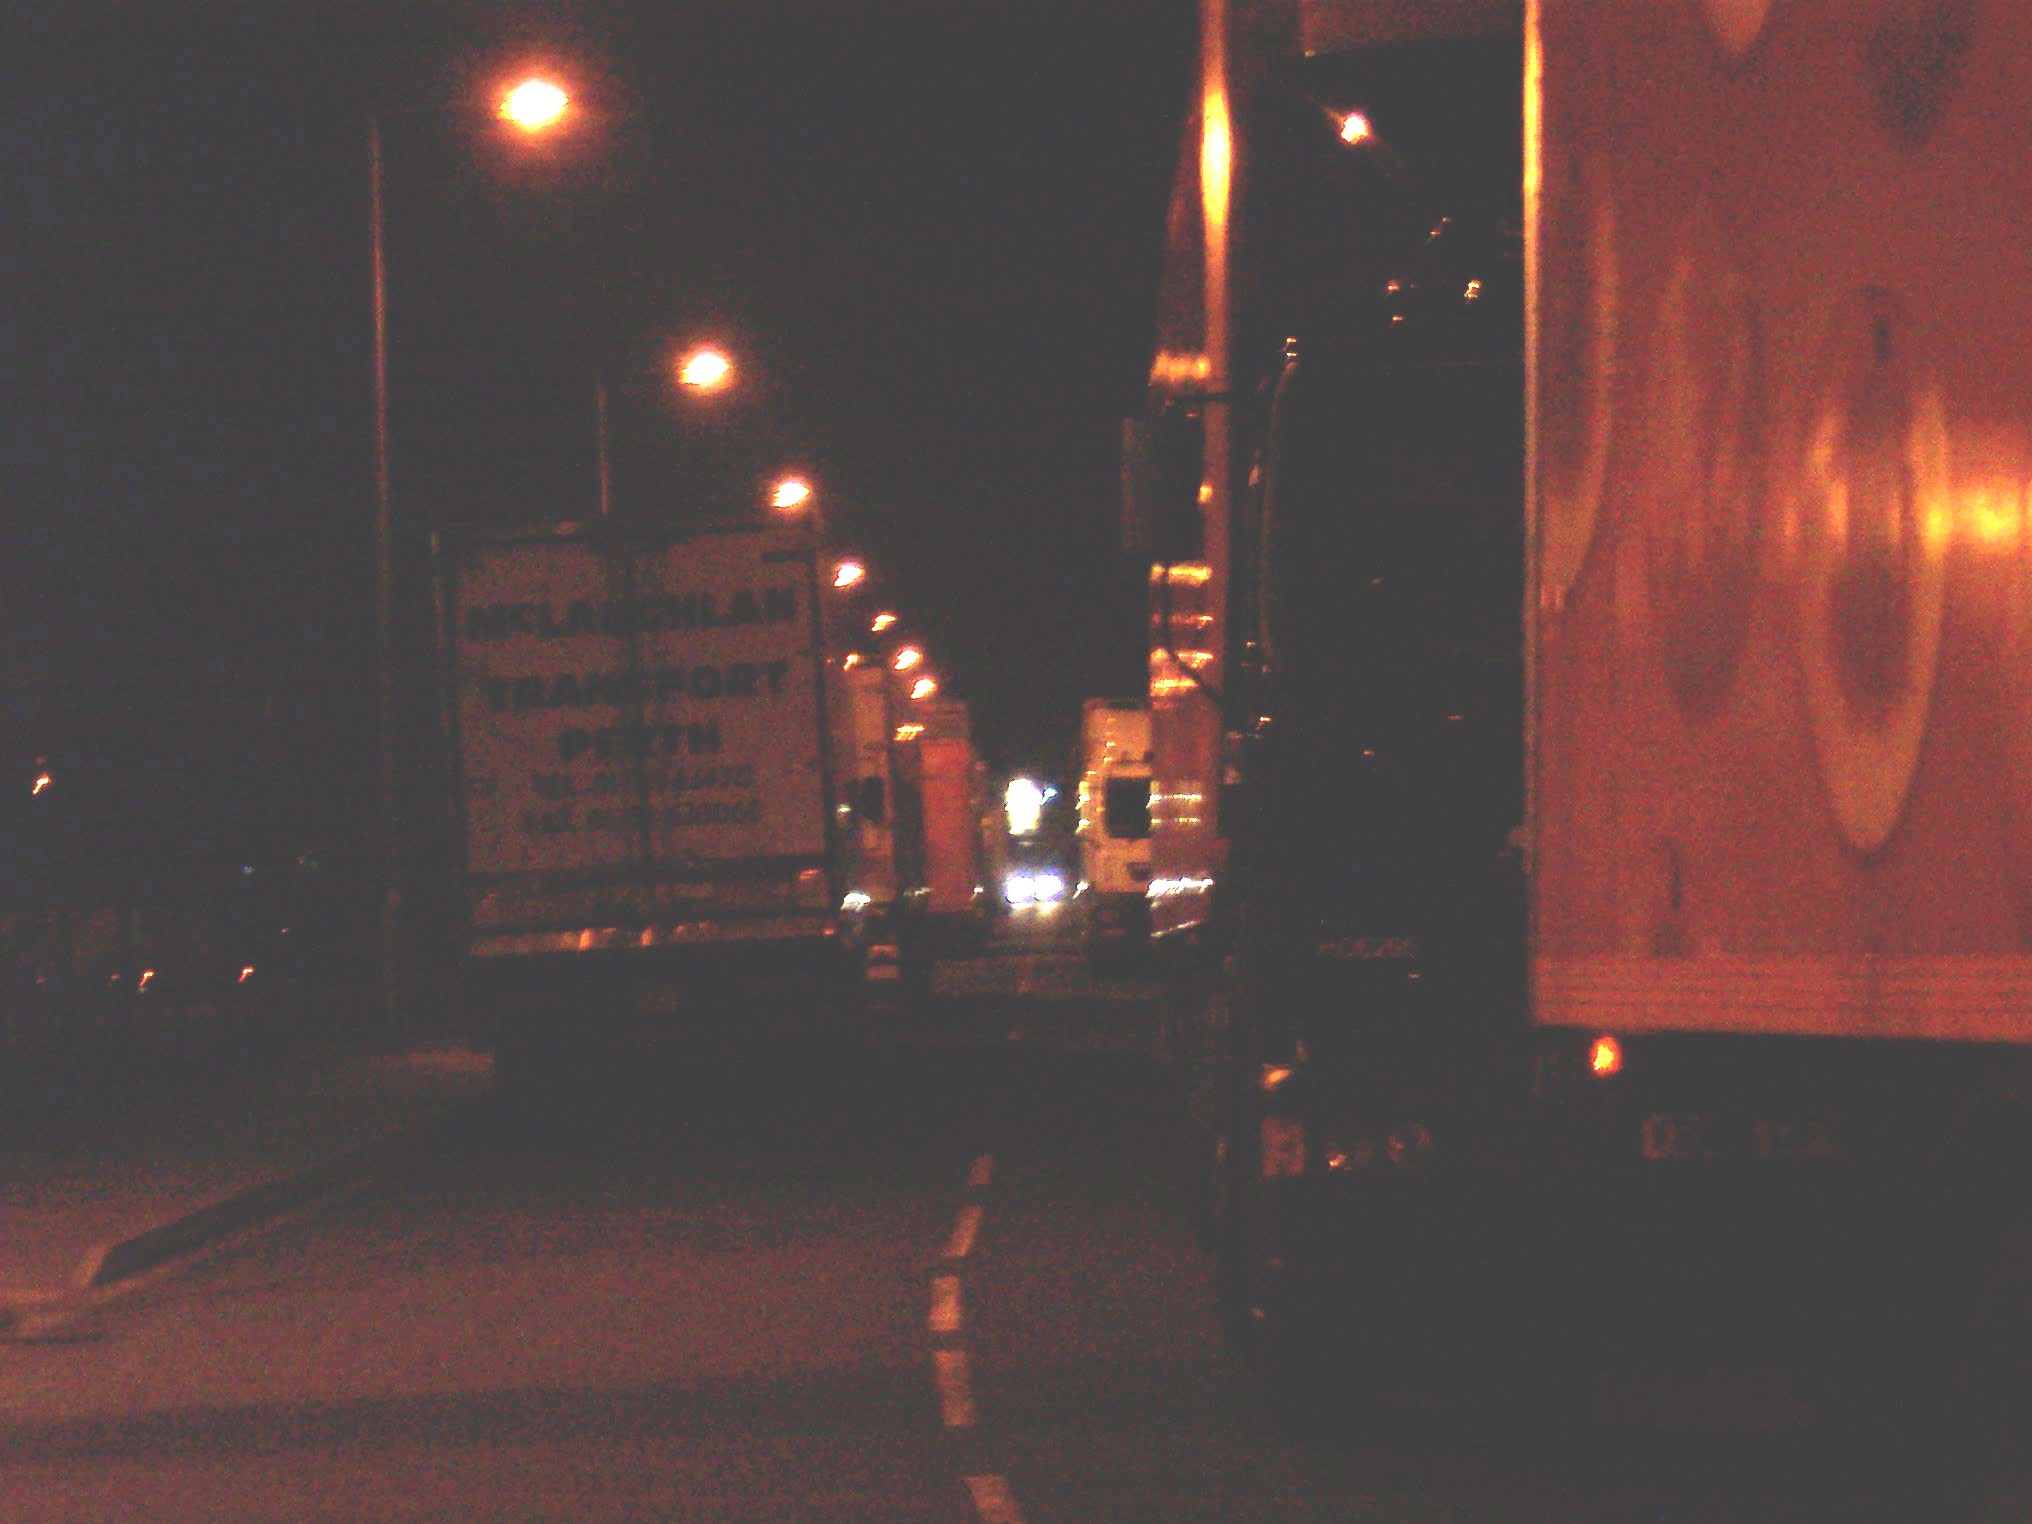 Lorries queuing; light of police car in backround